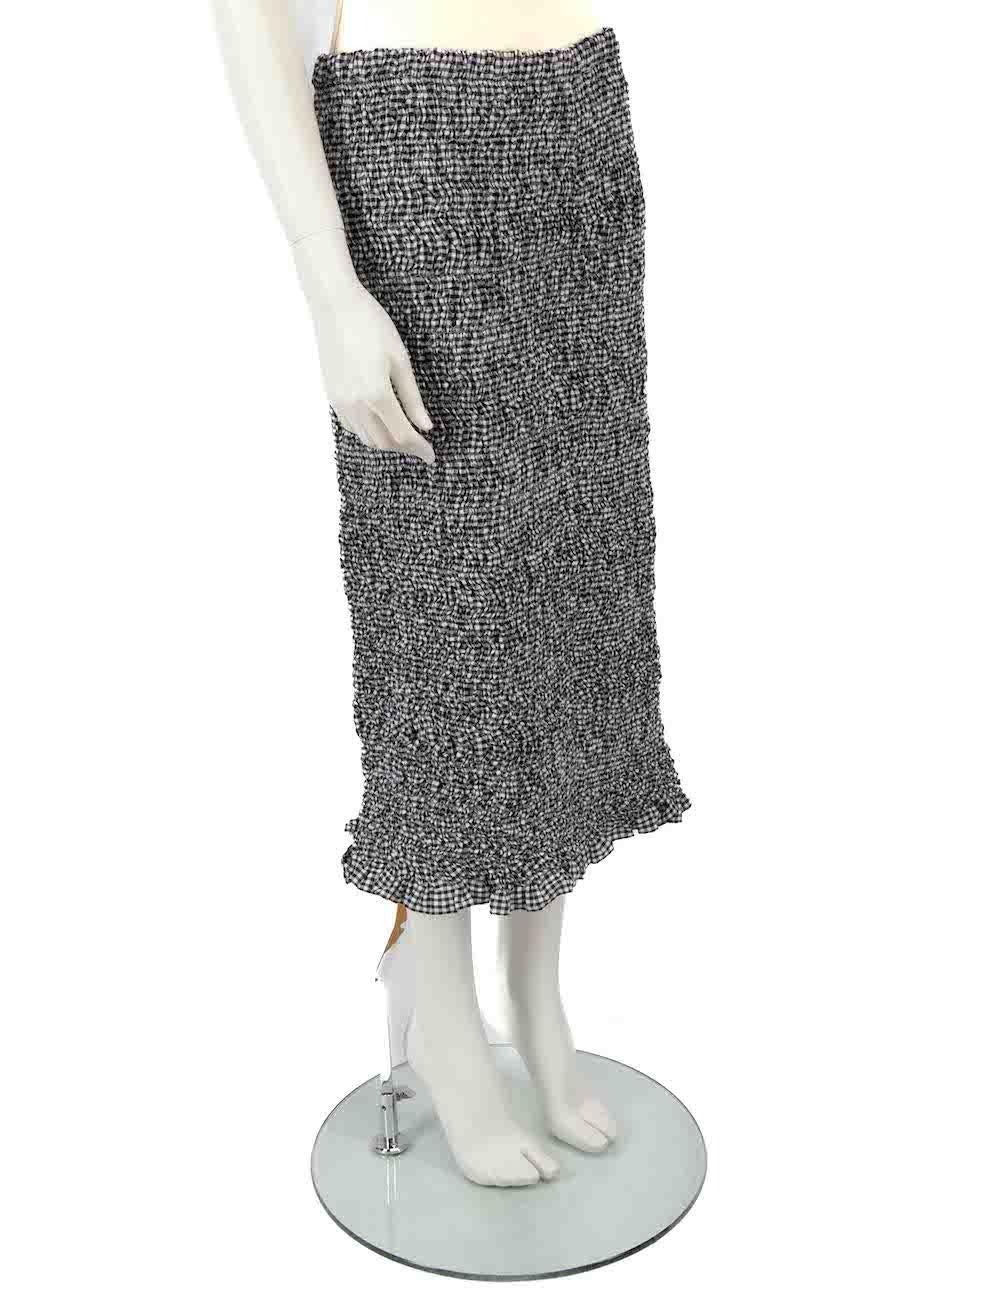 CONDITION is Never worn, with tags. No visible wear to skirt is evident on this new Miu Miu designer resale item.
 
 Details
 Grey
 Cotton
 Straight skirt
 Gingham pattern
 Smocked
 Stretchy
 Midi
 
 
 Made in Italy
 
 Composition
 98% Cotton, 1%